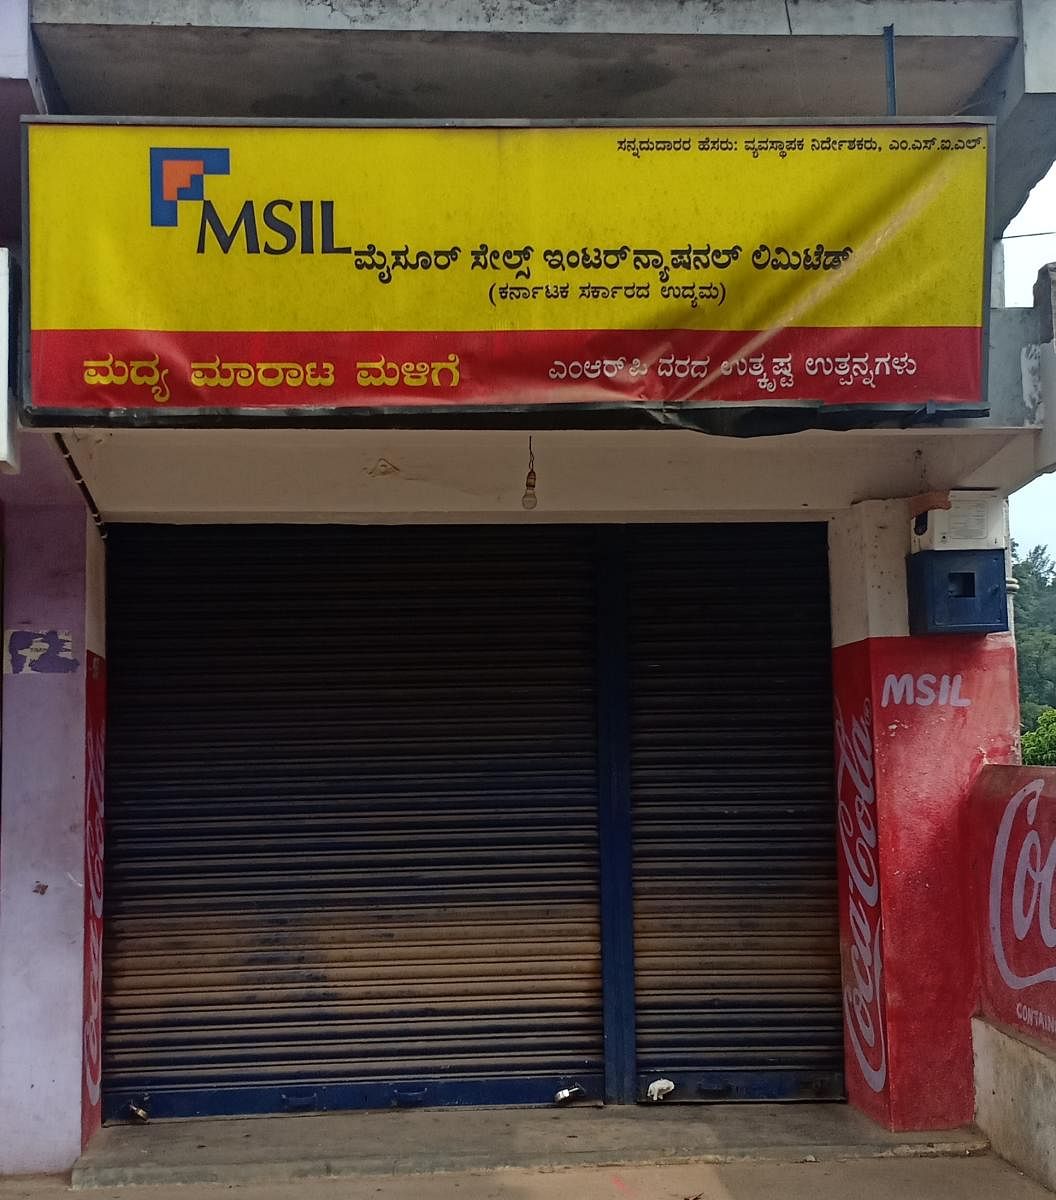 Thieves gained entry into the MSIL liquor outlet in Somwarpet.